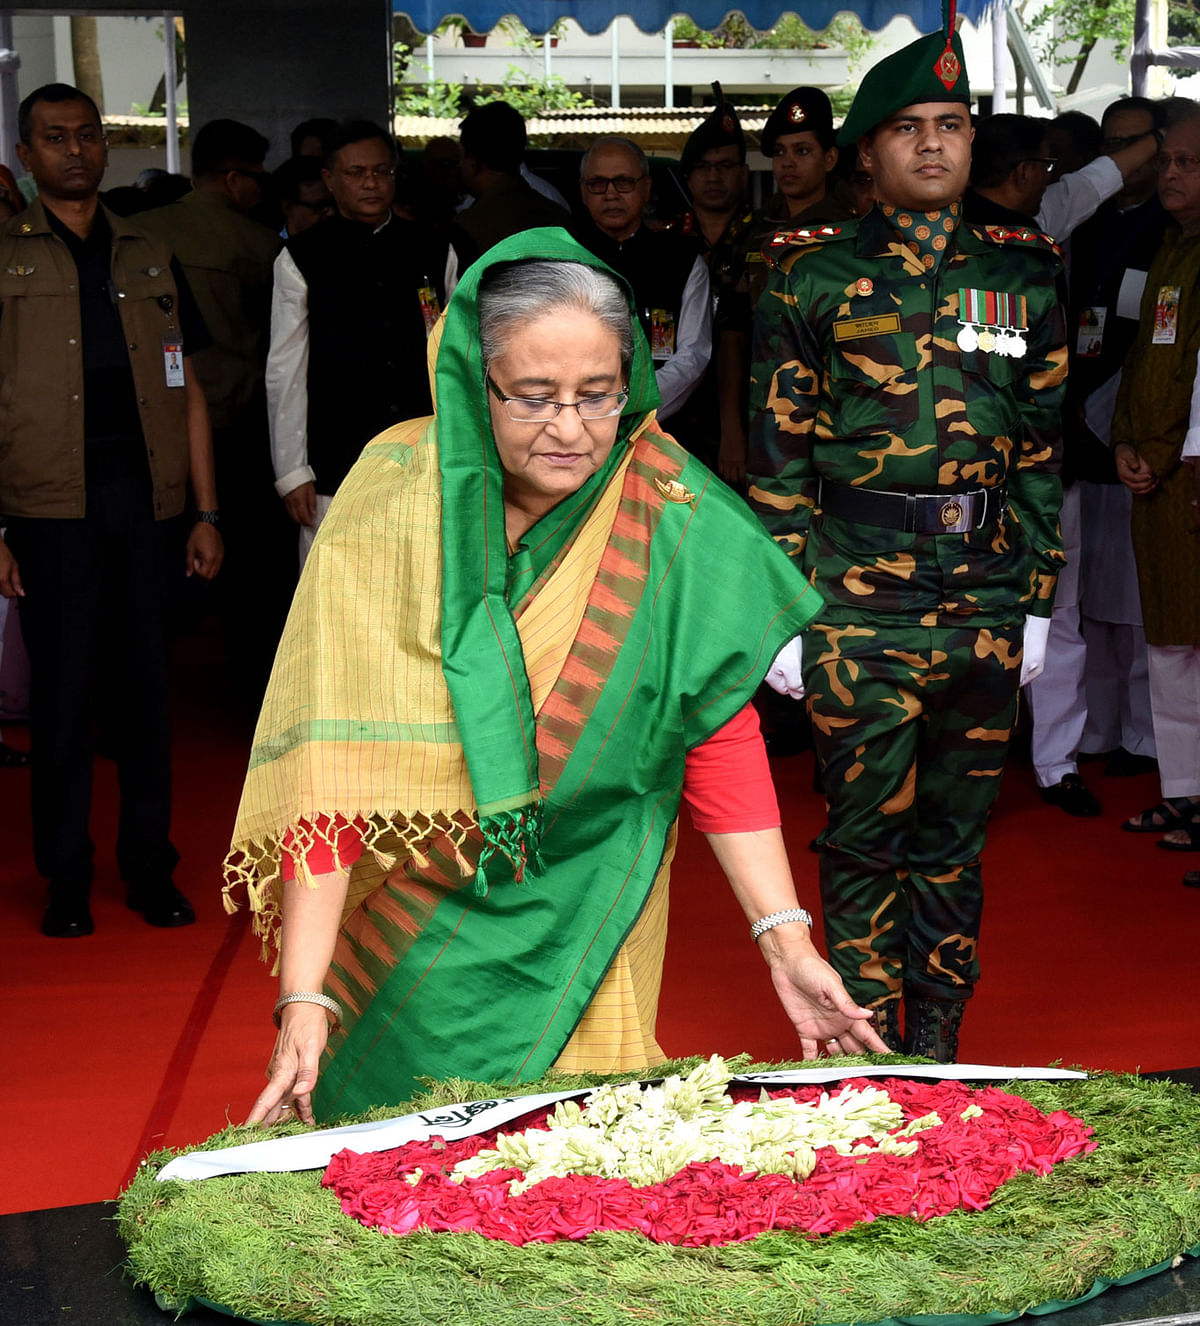 Awami League president and prime minister Sheikh Hasina pays homage to the country’s founding father Sheikh Mujibur Rahman, also her father, at the portrait of Bangabandhu Sheikh Mujibur Rahman on Saturday, marking the 69th founding anniversary of Awami League. Photo: BSS